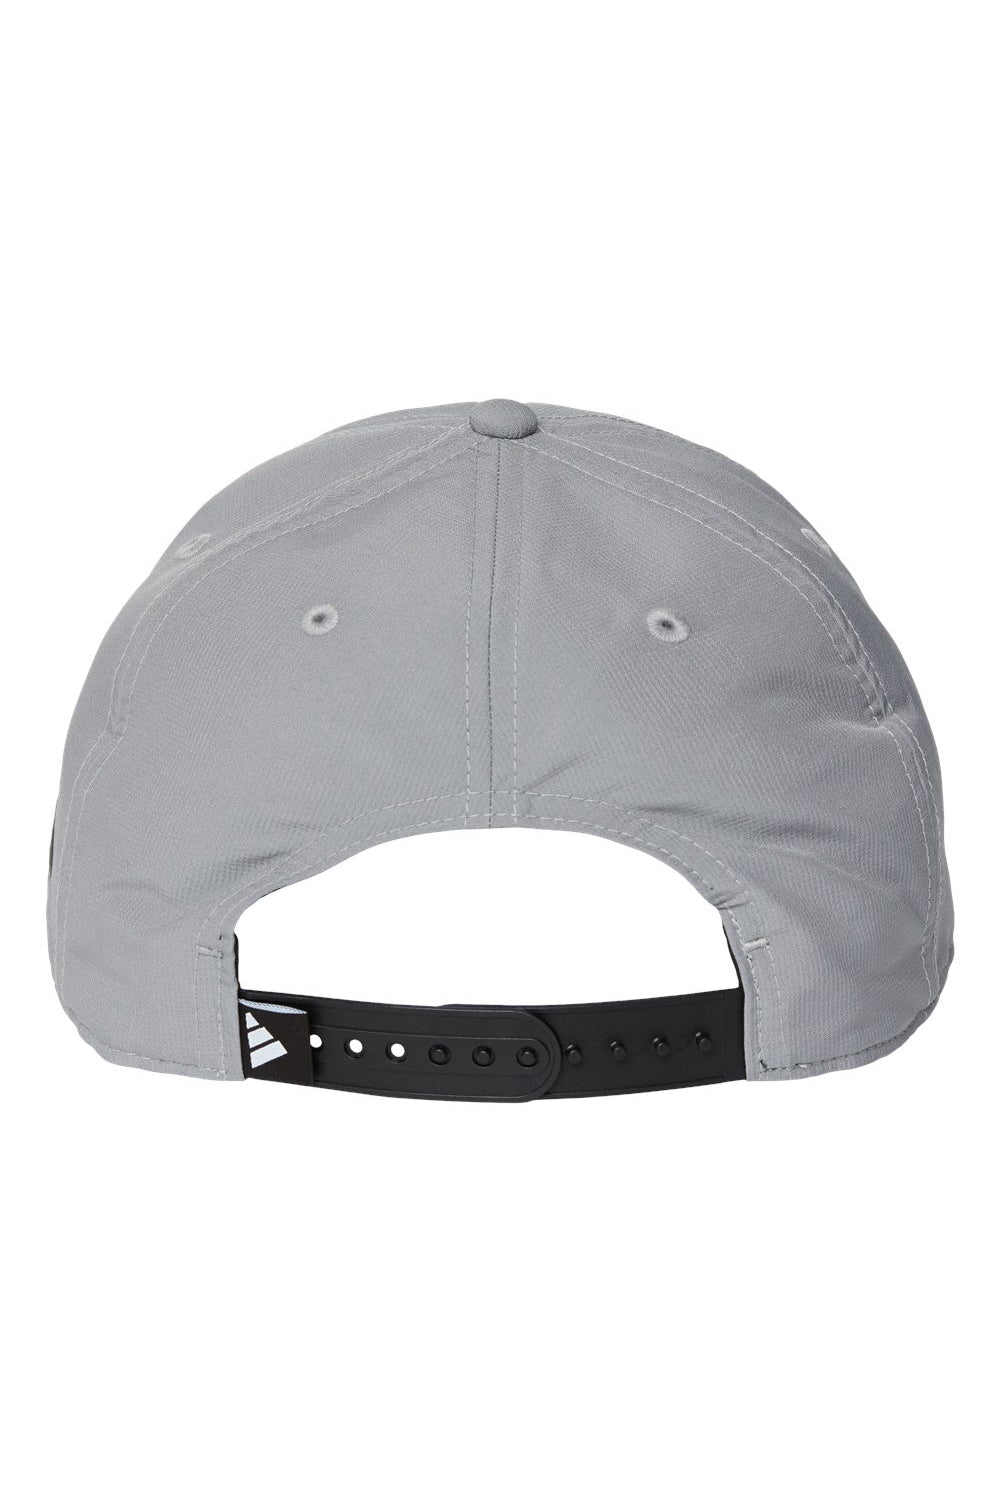 Adidas A605S Mens Sustainable Performance Moisture Wicking Snapback Hat Grey Flat Back